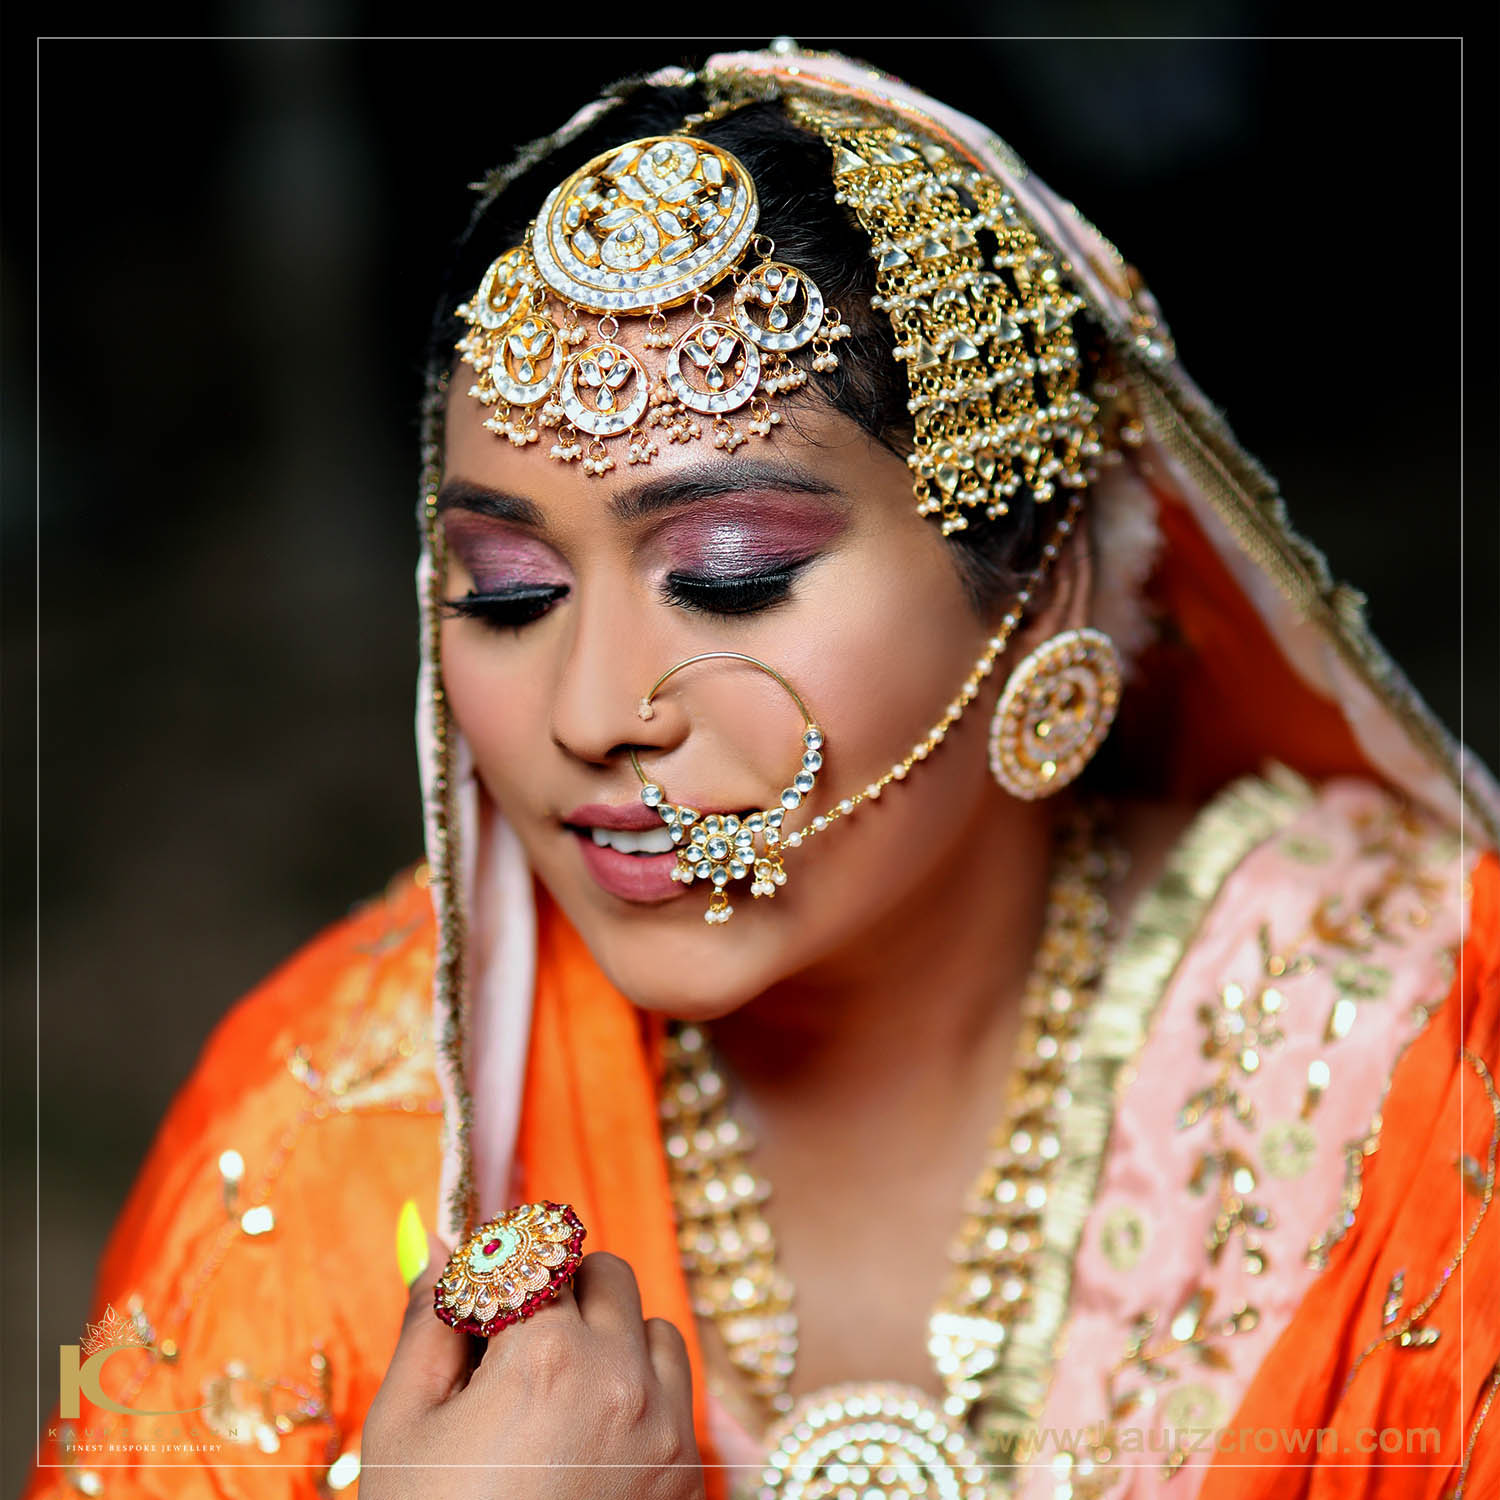 Premium Photo | Portrait indian beautiful female in golden rich jewelery  and tradition saree face closeup professional makeup wearing bindi on head  muslim woman face portrait with bindis maang tikka nathnose pin